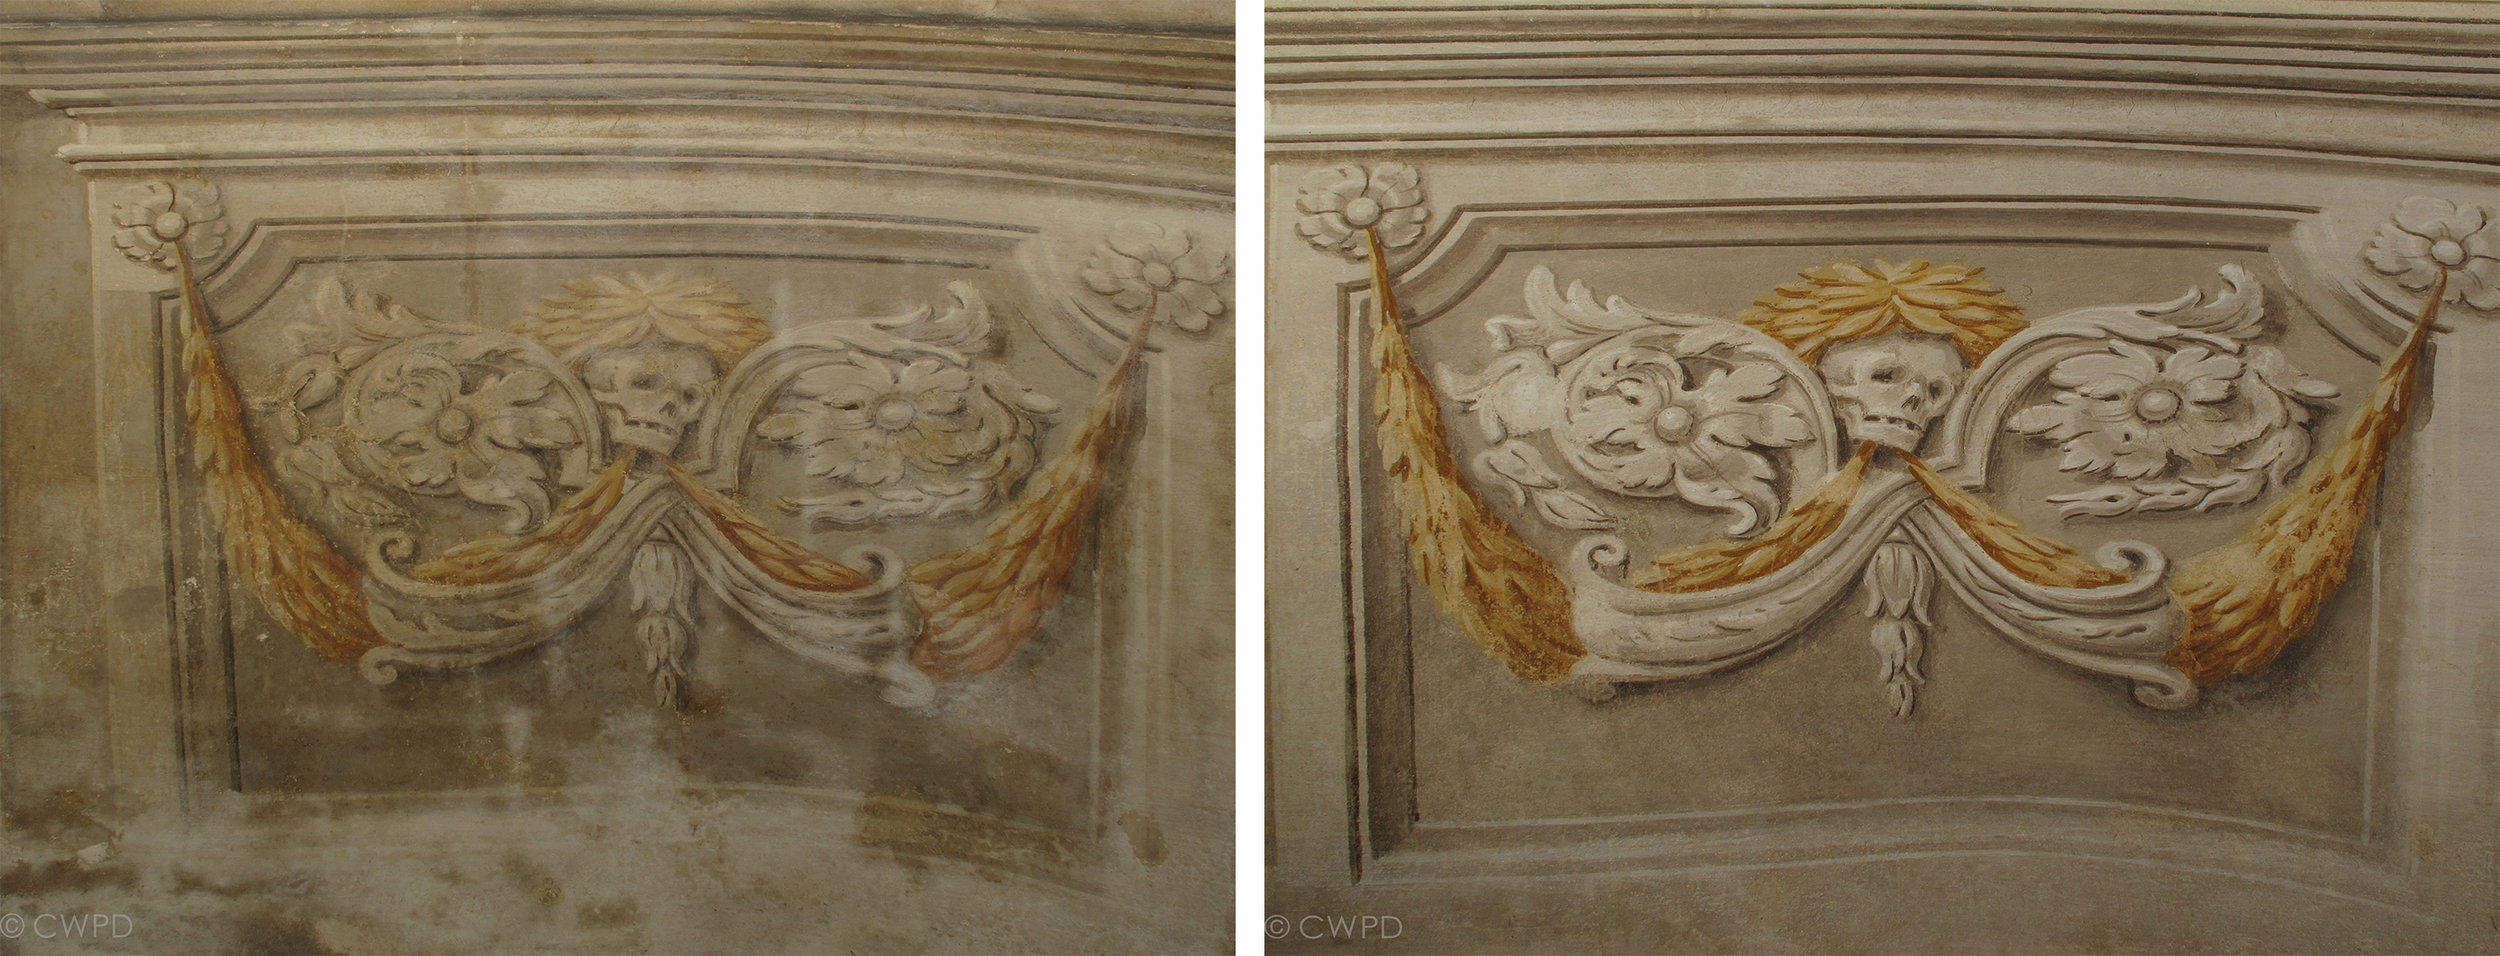  Detail of the wall paintings before (left) and after (right) cleaning.  Image © Courtauld CWPD 